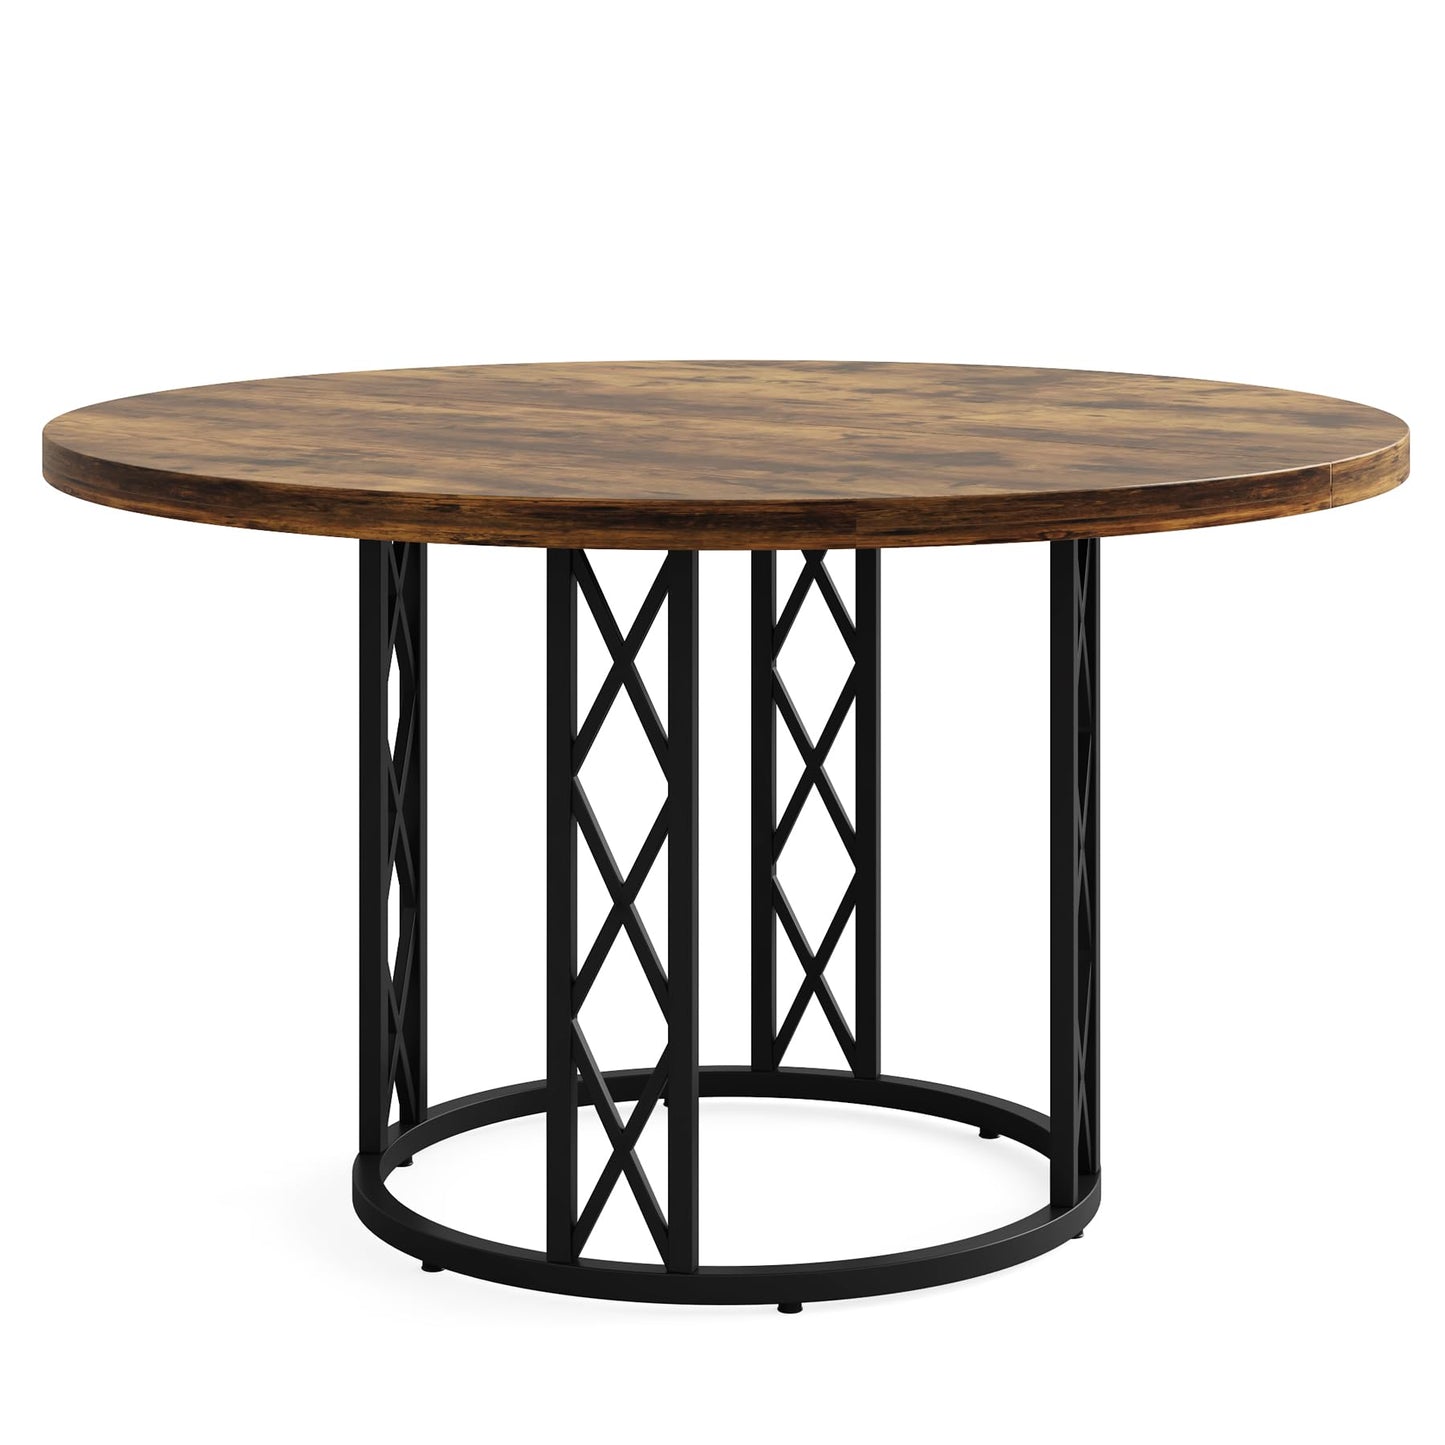 Tribesigns Round Dining Table for 4 People, 47" Modern Kitchen Table with Wood Grain Surface & Metal Base, Rustic Round Table for Dining Room, Living Room, Brown & Black（Only Table）